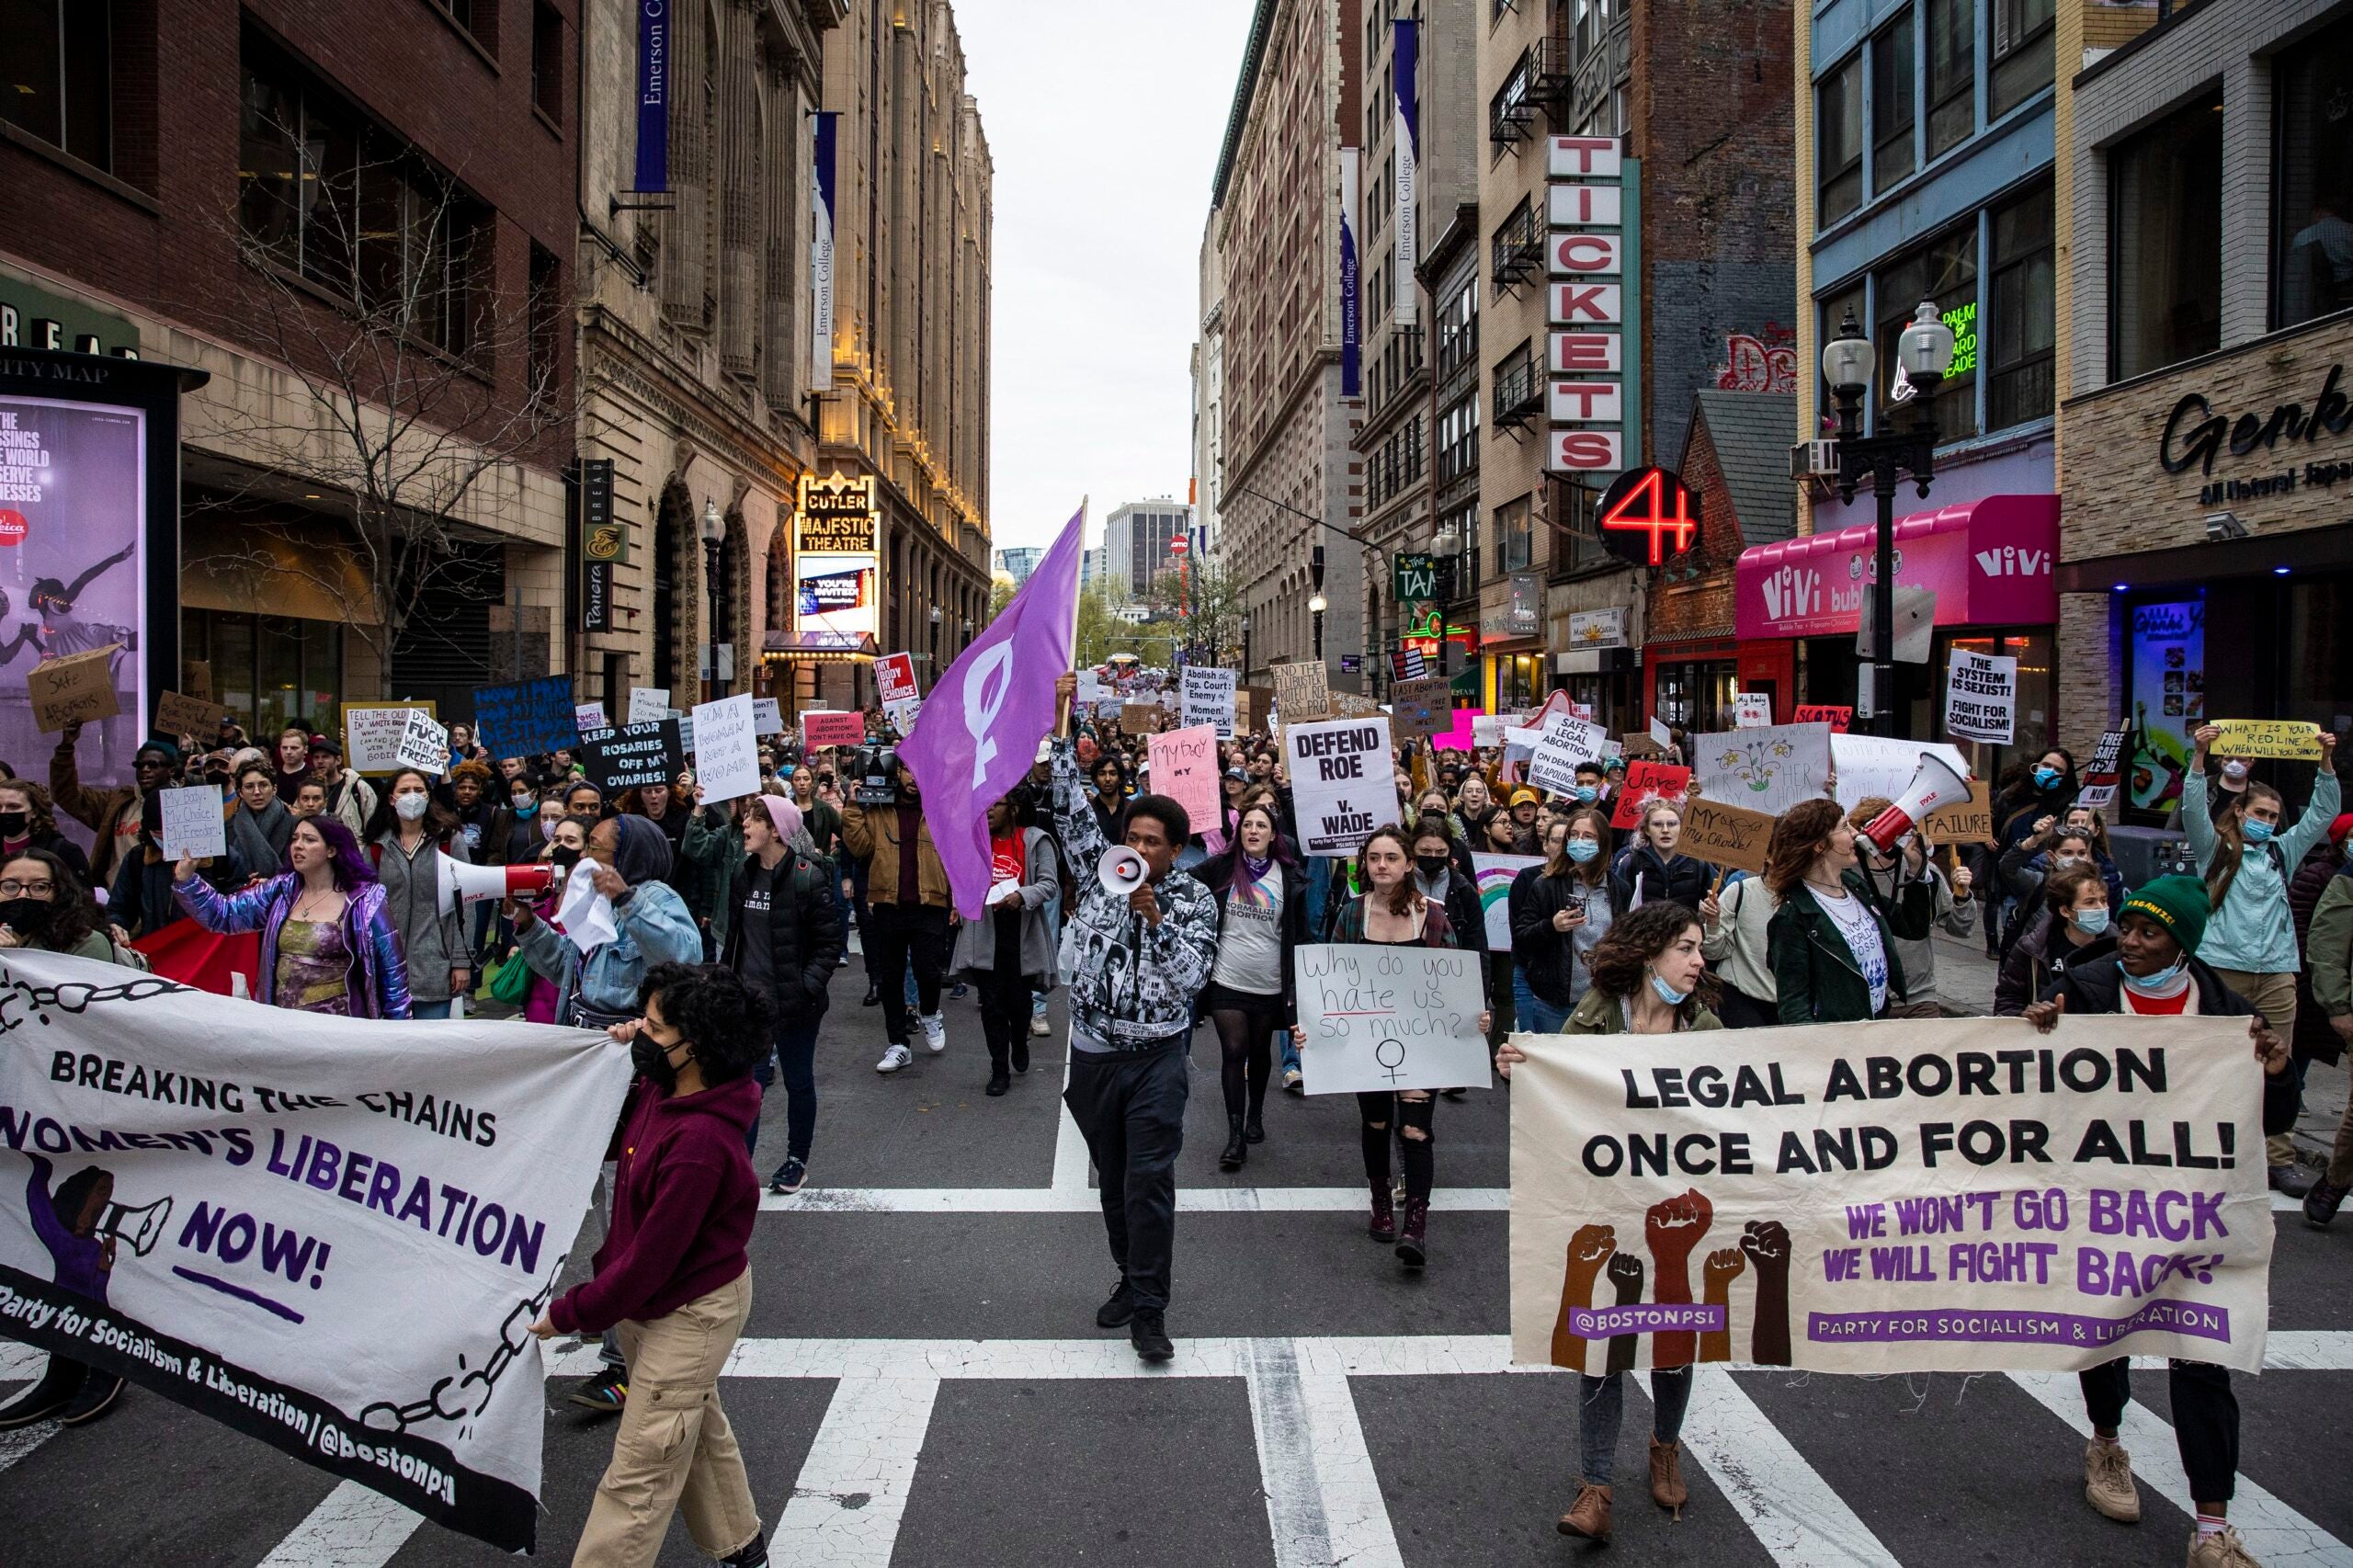 Pro-choice activists take to the streets in Boston